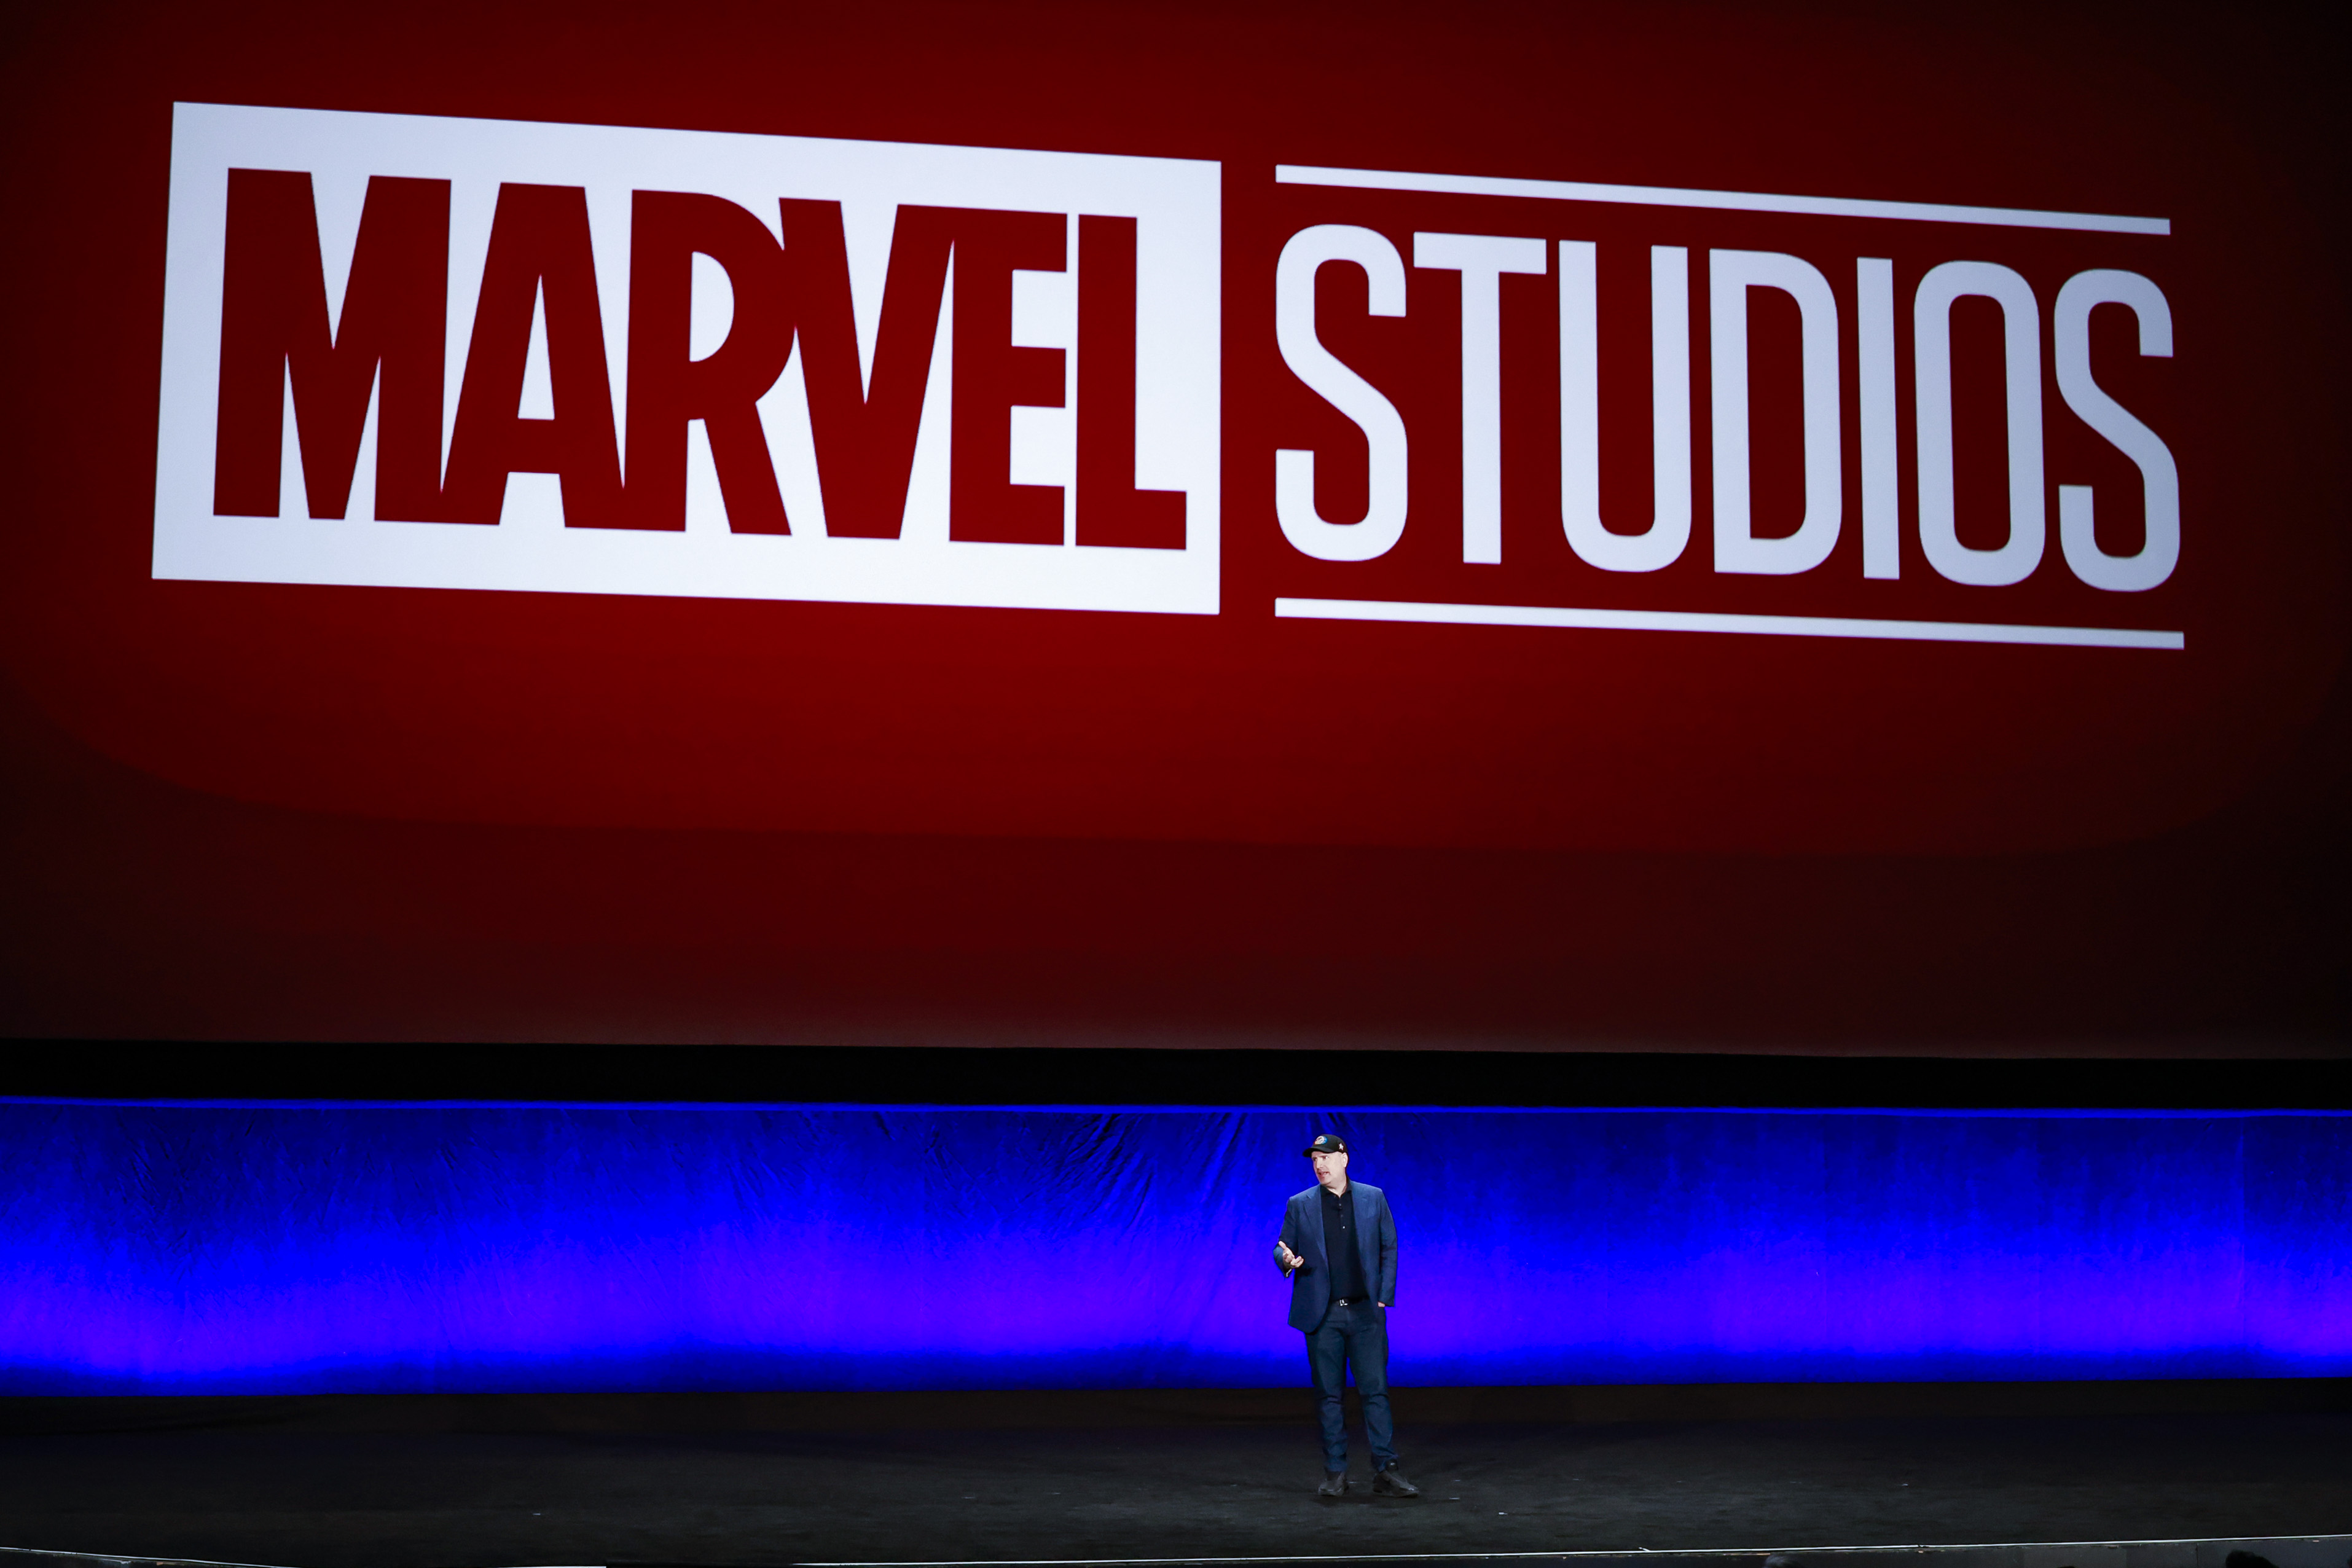 Kevin Feige, who will appear at the Marvel panel during San Diego Comic-Con 2022, stands onstage in front of a sign for Marvel Studios.